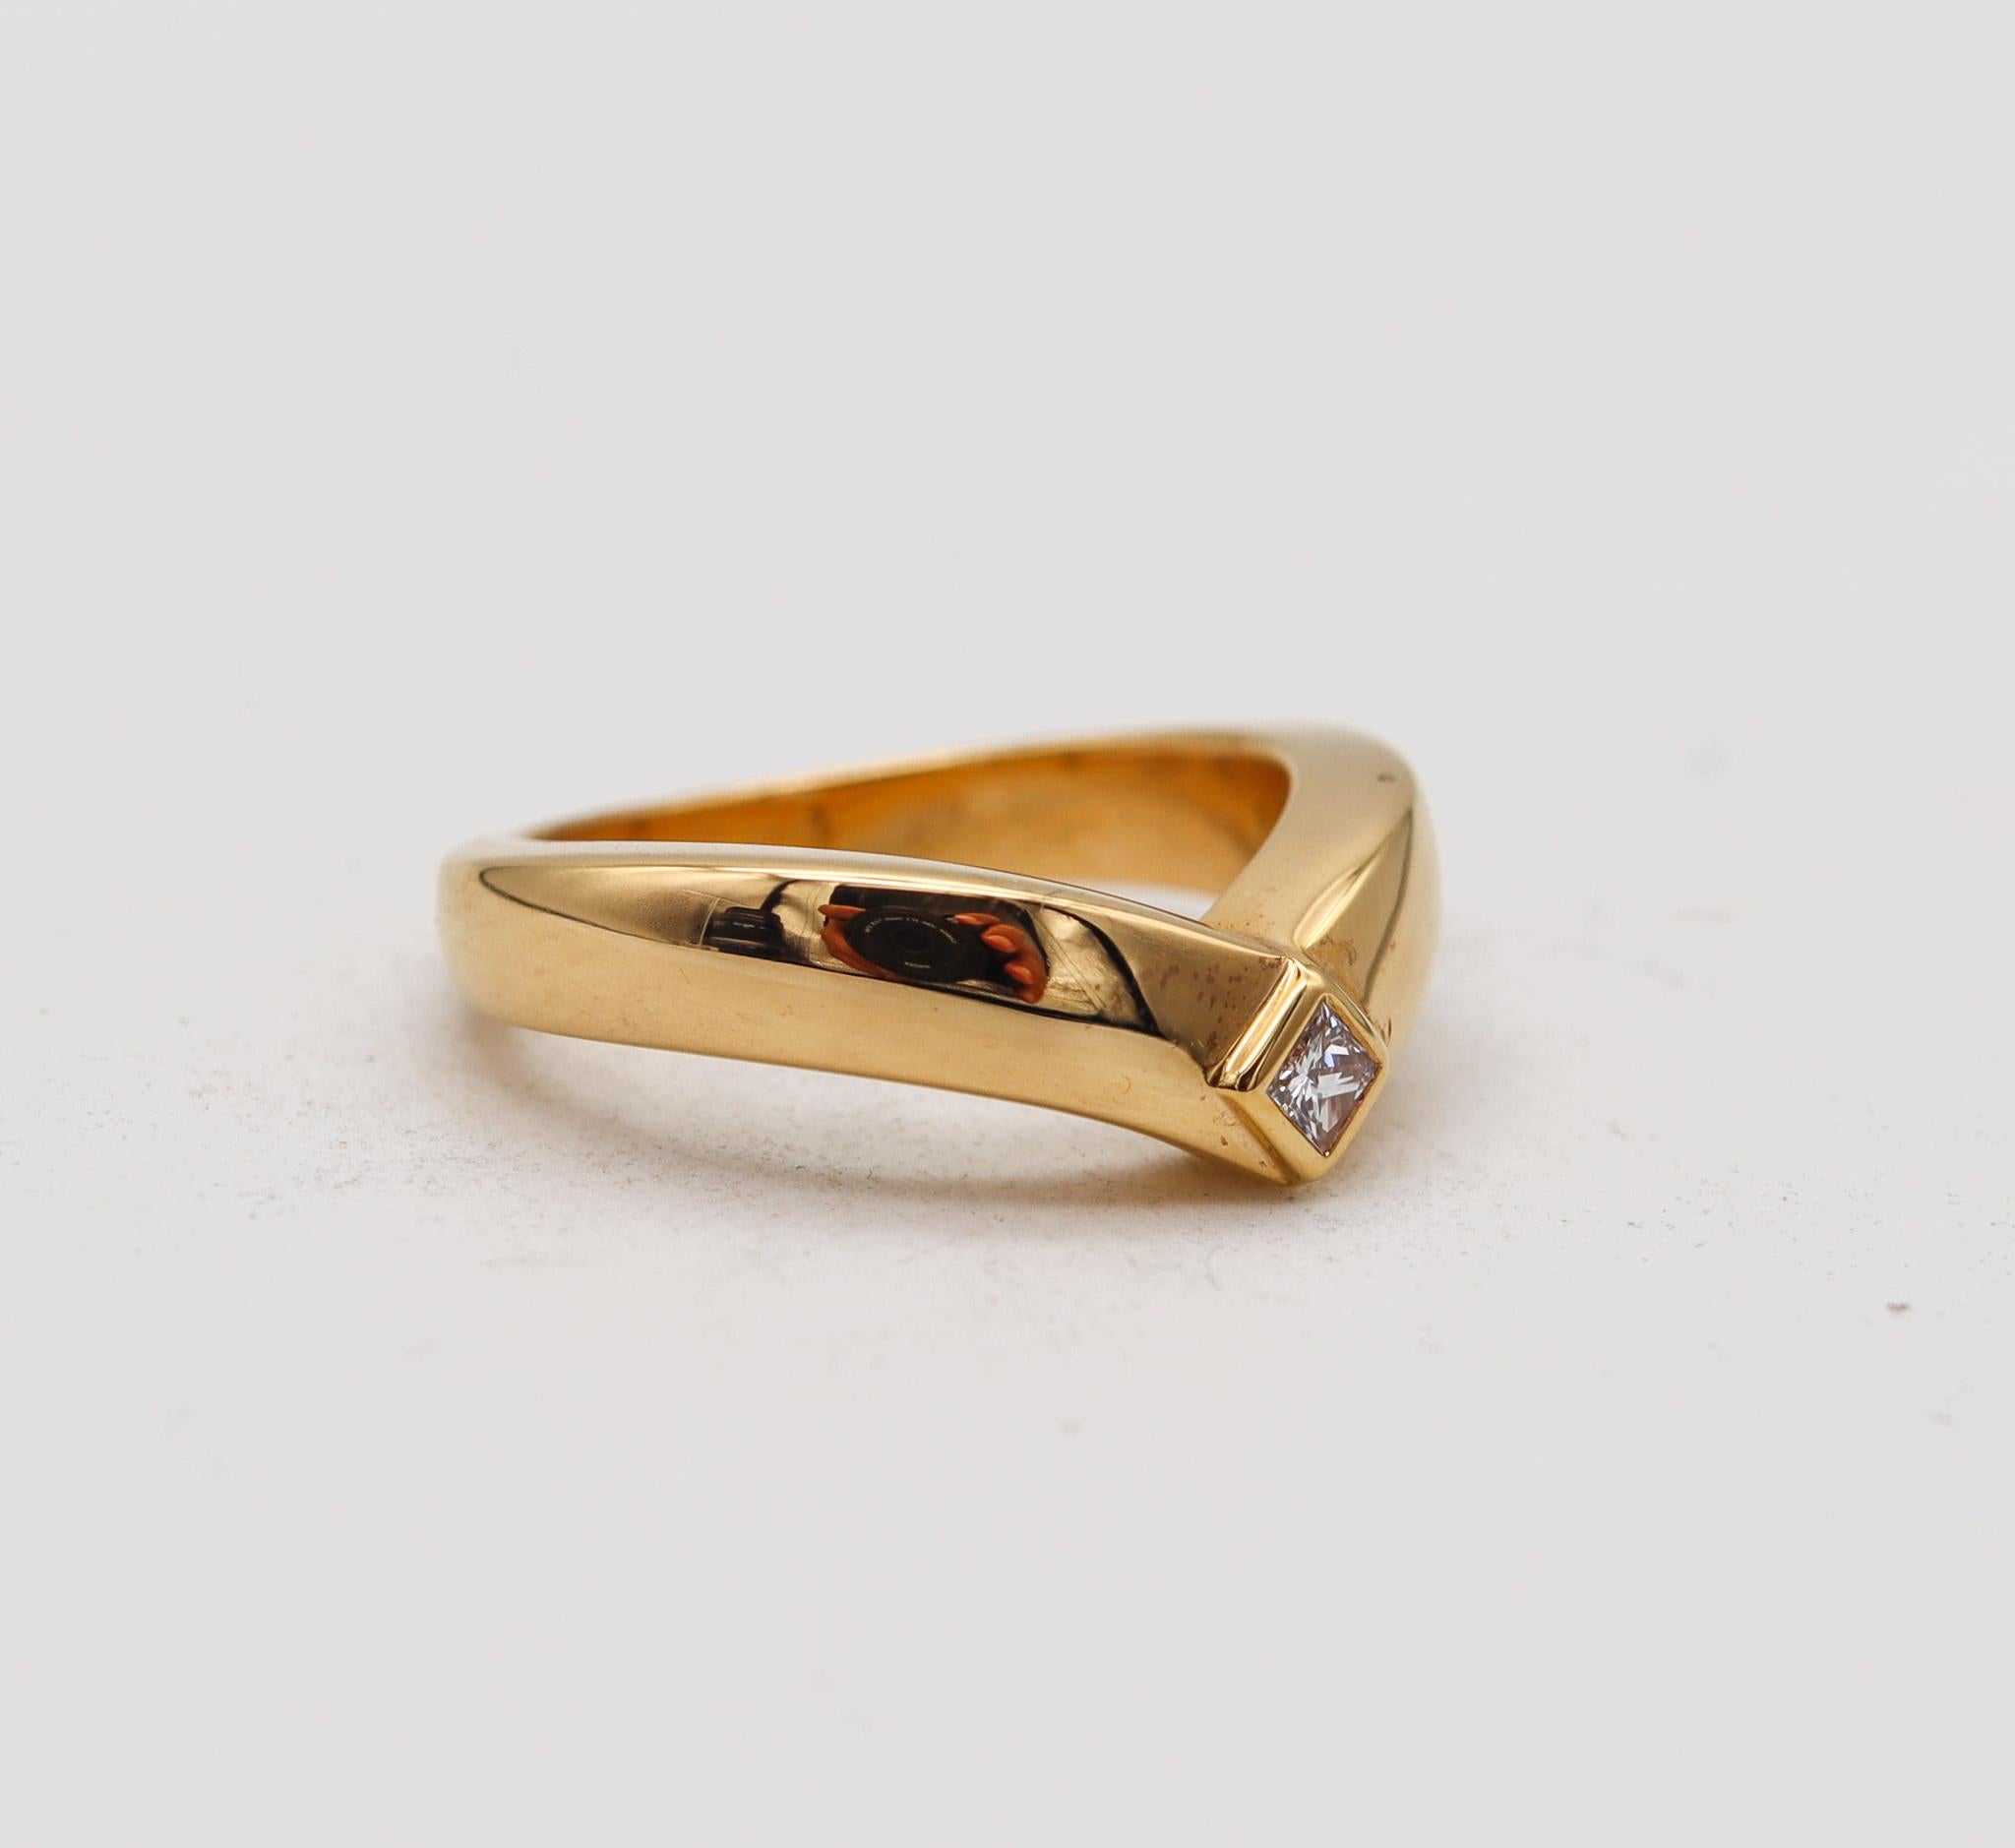 Buy Stylish Teens Exclusive Limited Edition 24Kt Gold Swarovski Crystal  Adjustable Mens Rings With Red Rose Box Online at Low Prices in India -  Paytmmall.com